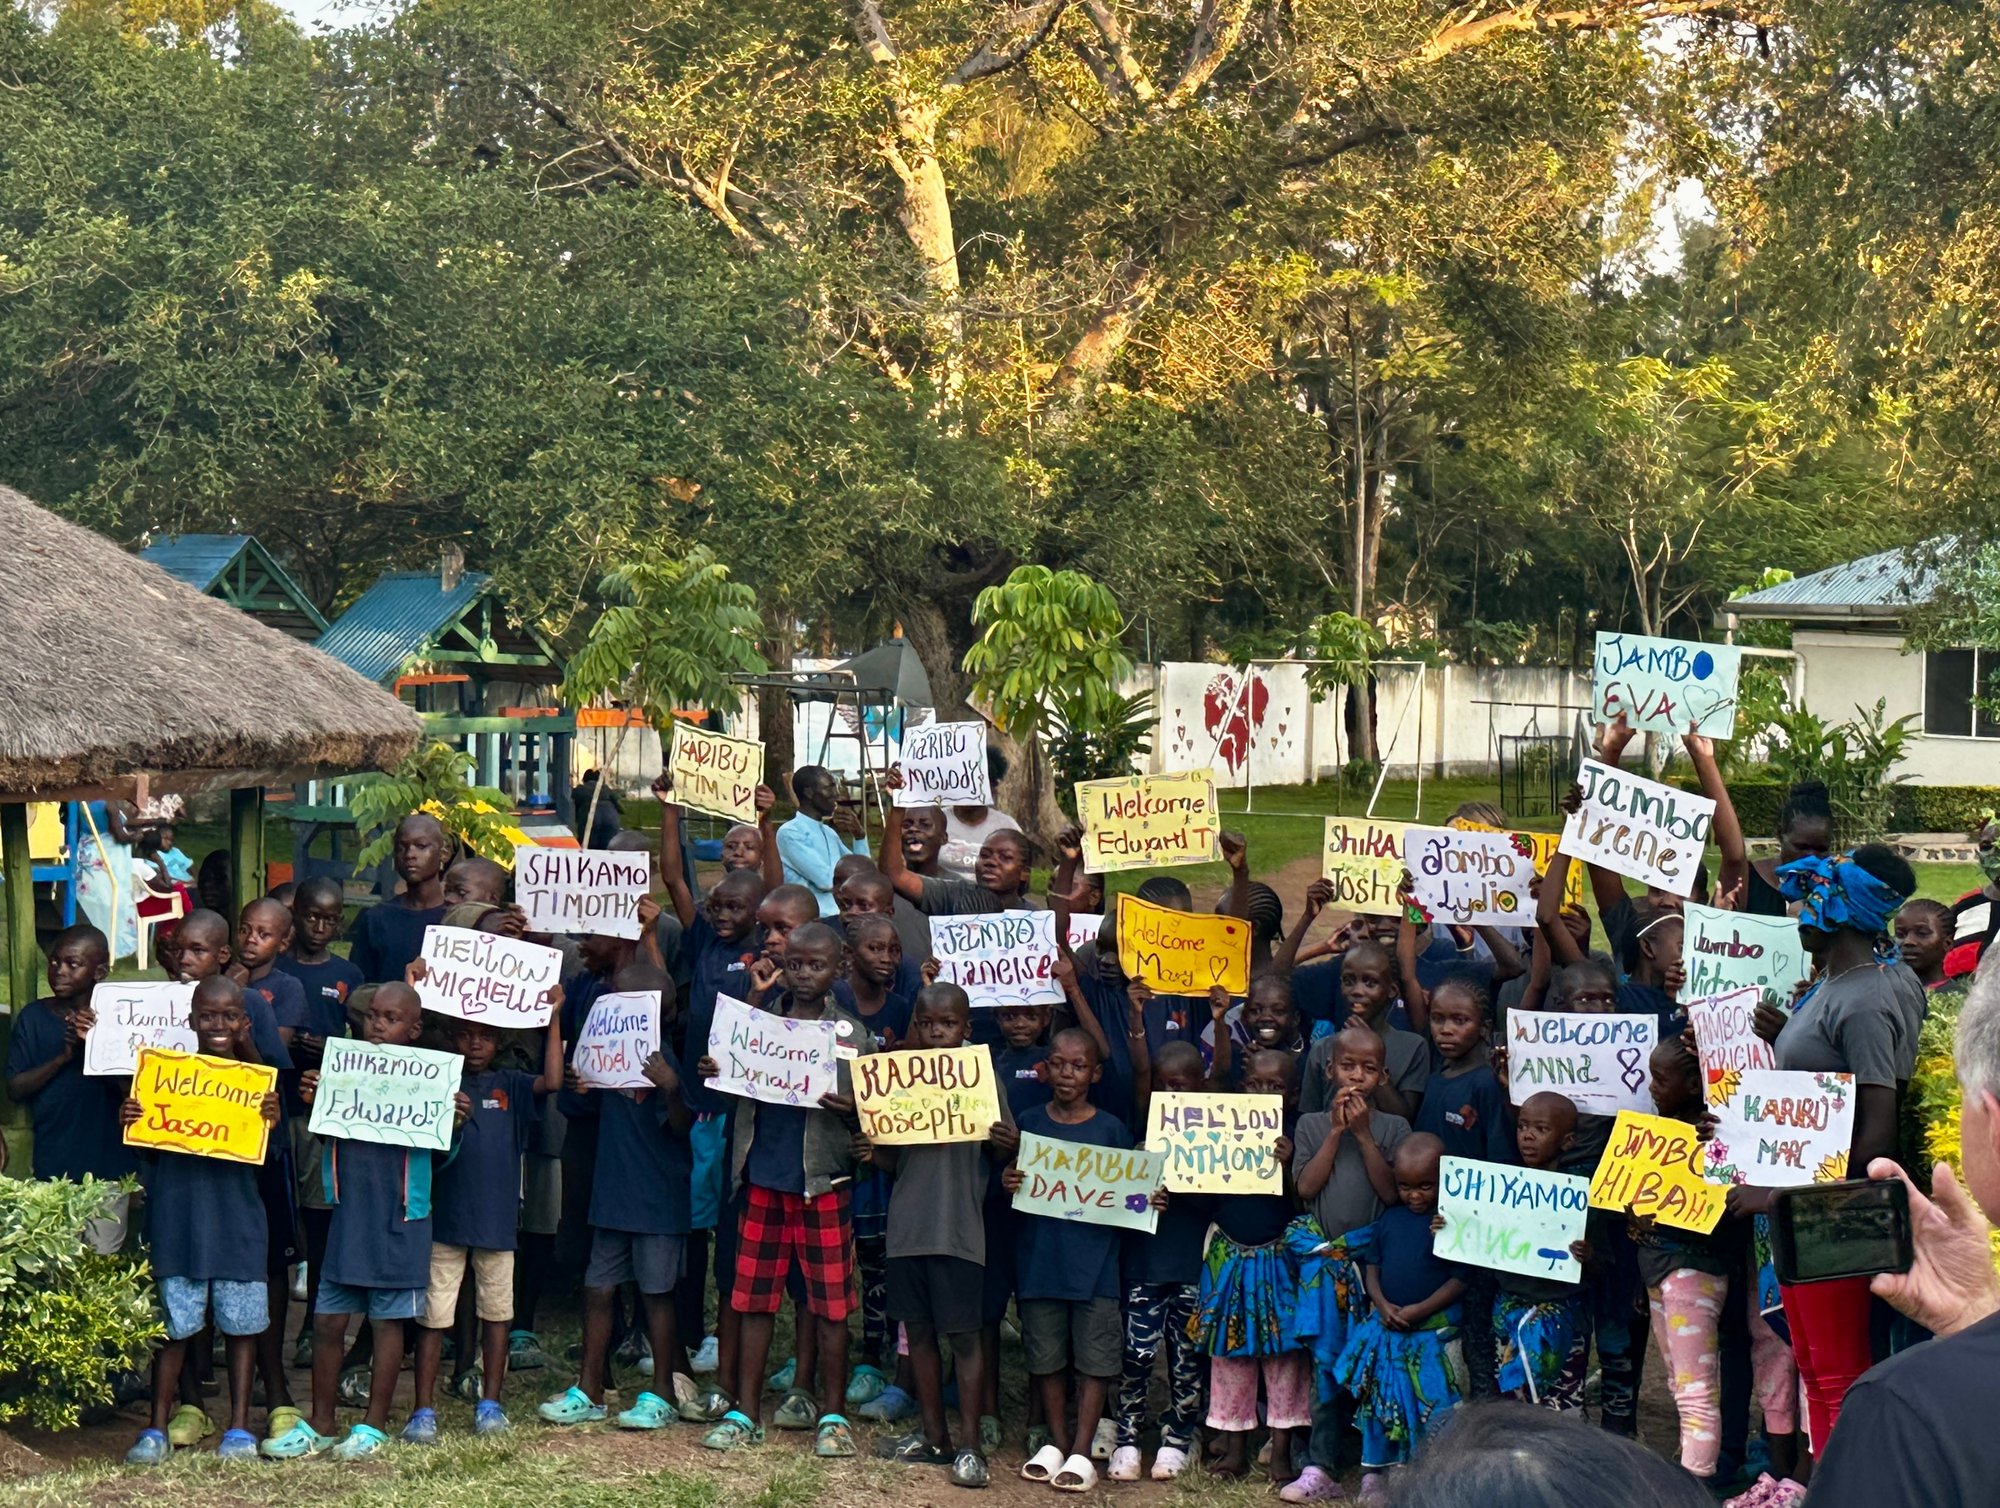 Children at CURE Kenya welcome TRIMEDX Foundation volunteers with handmade signs and smiles.